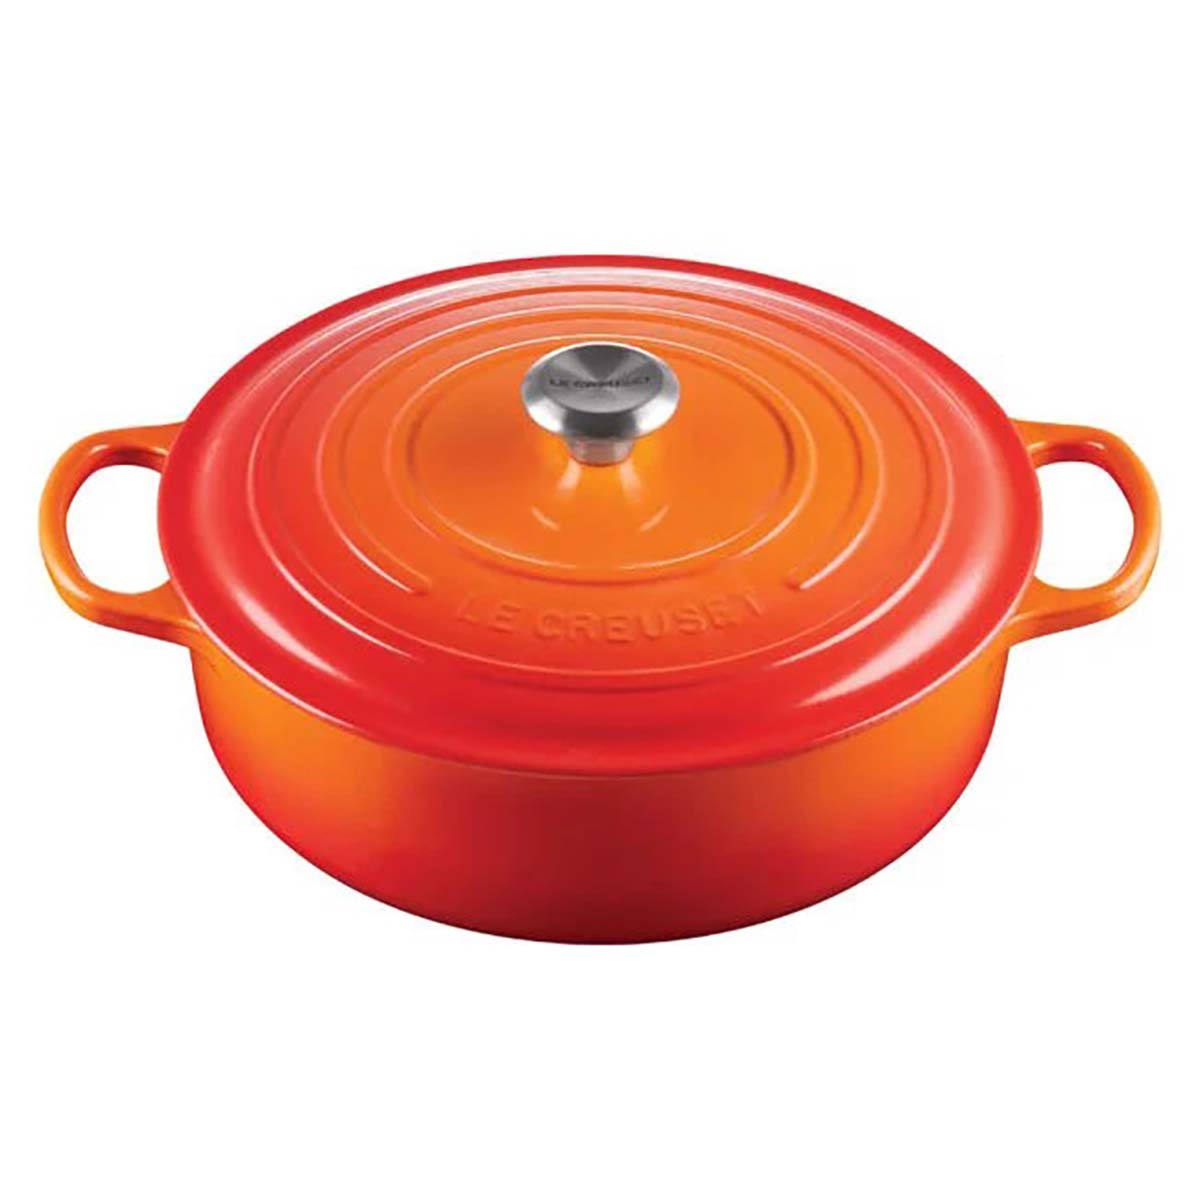 Le Creuset Sinature Round Wide Oven 6.75 qt - Flame